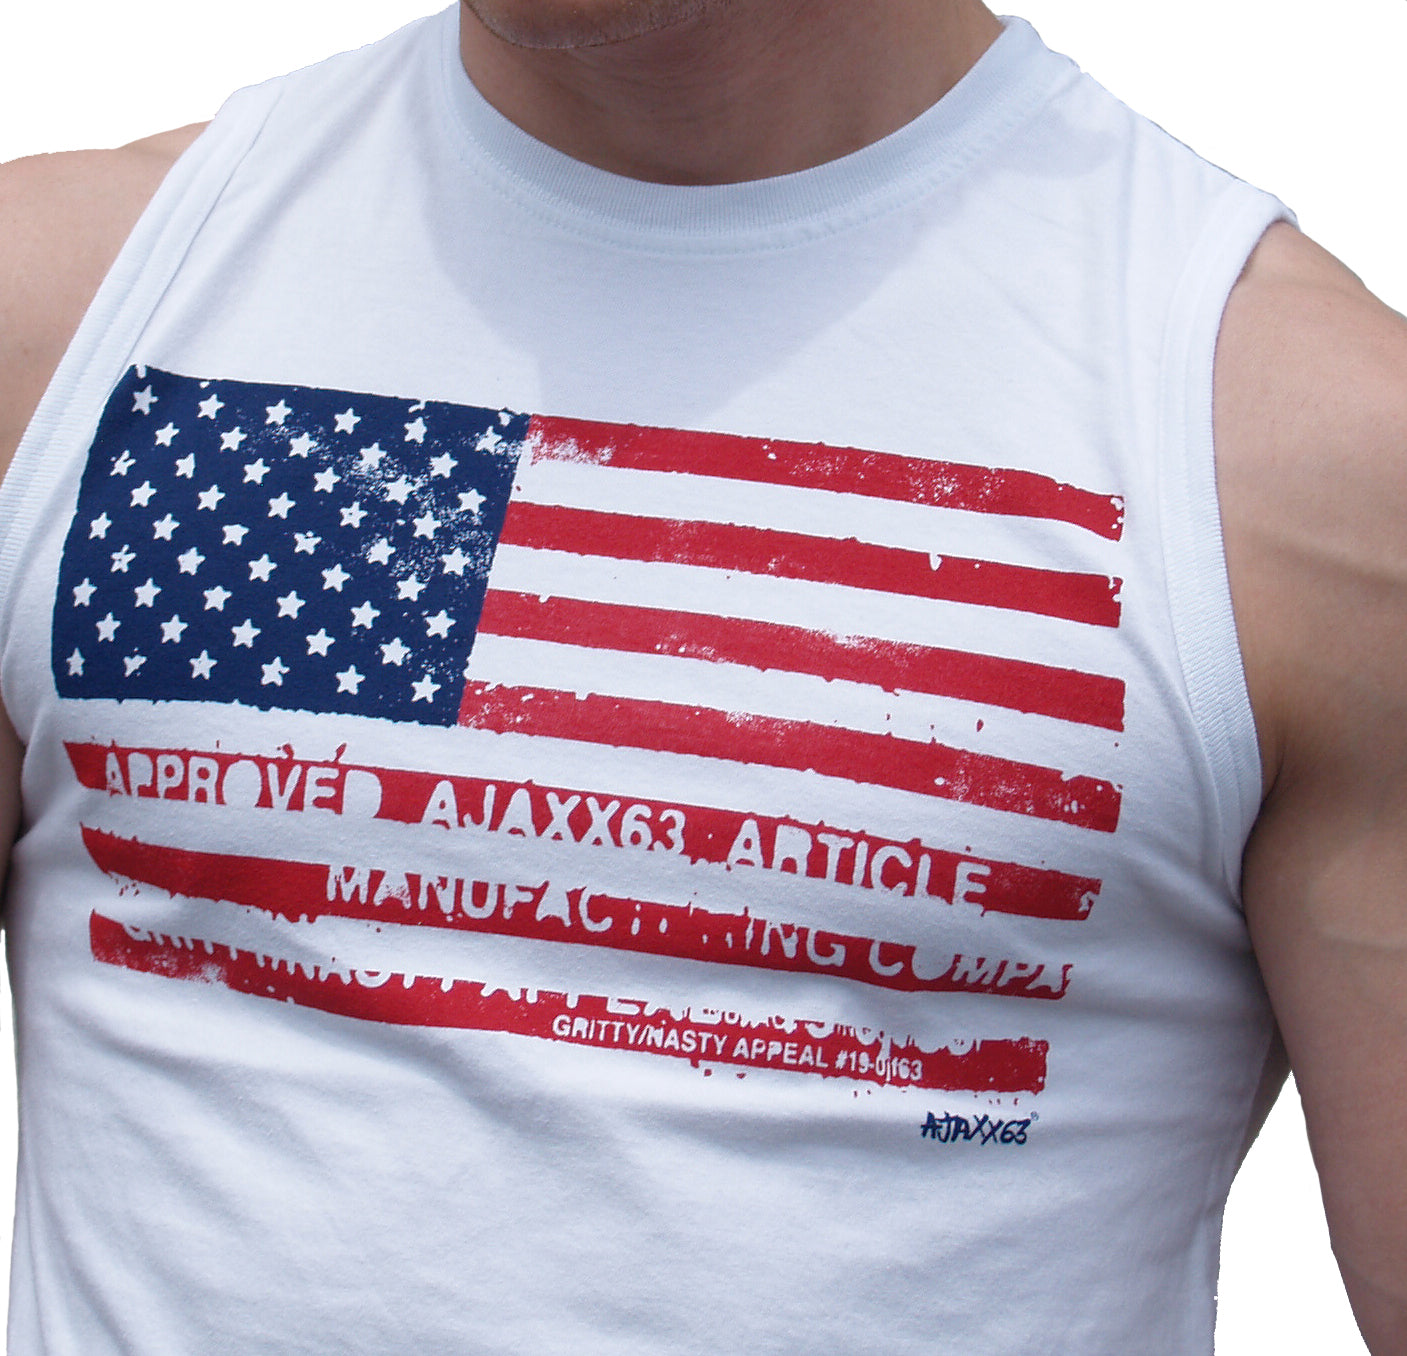 American Flag Sleeveless Athletic Fit